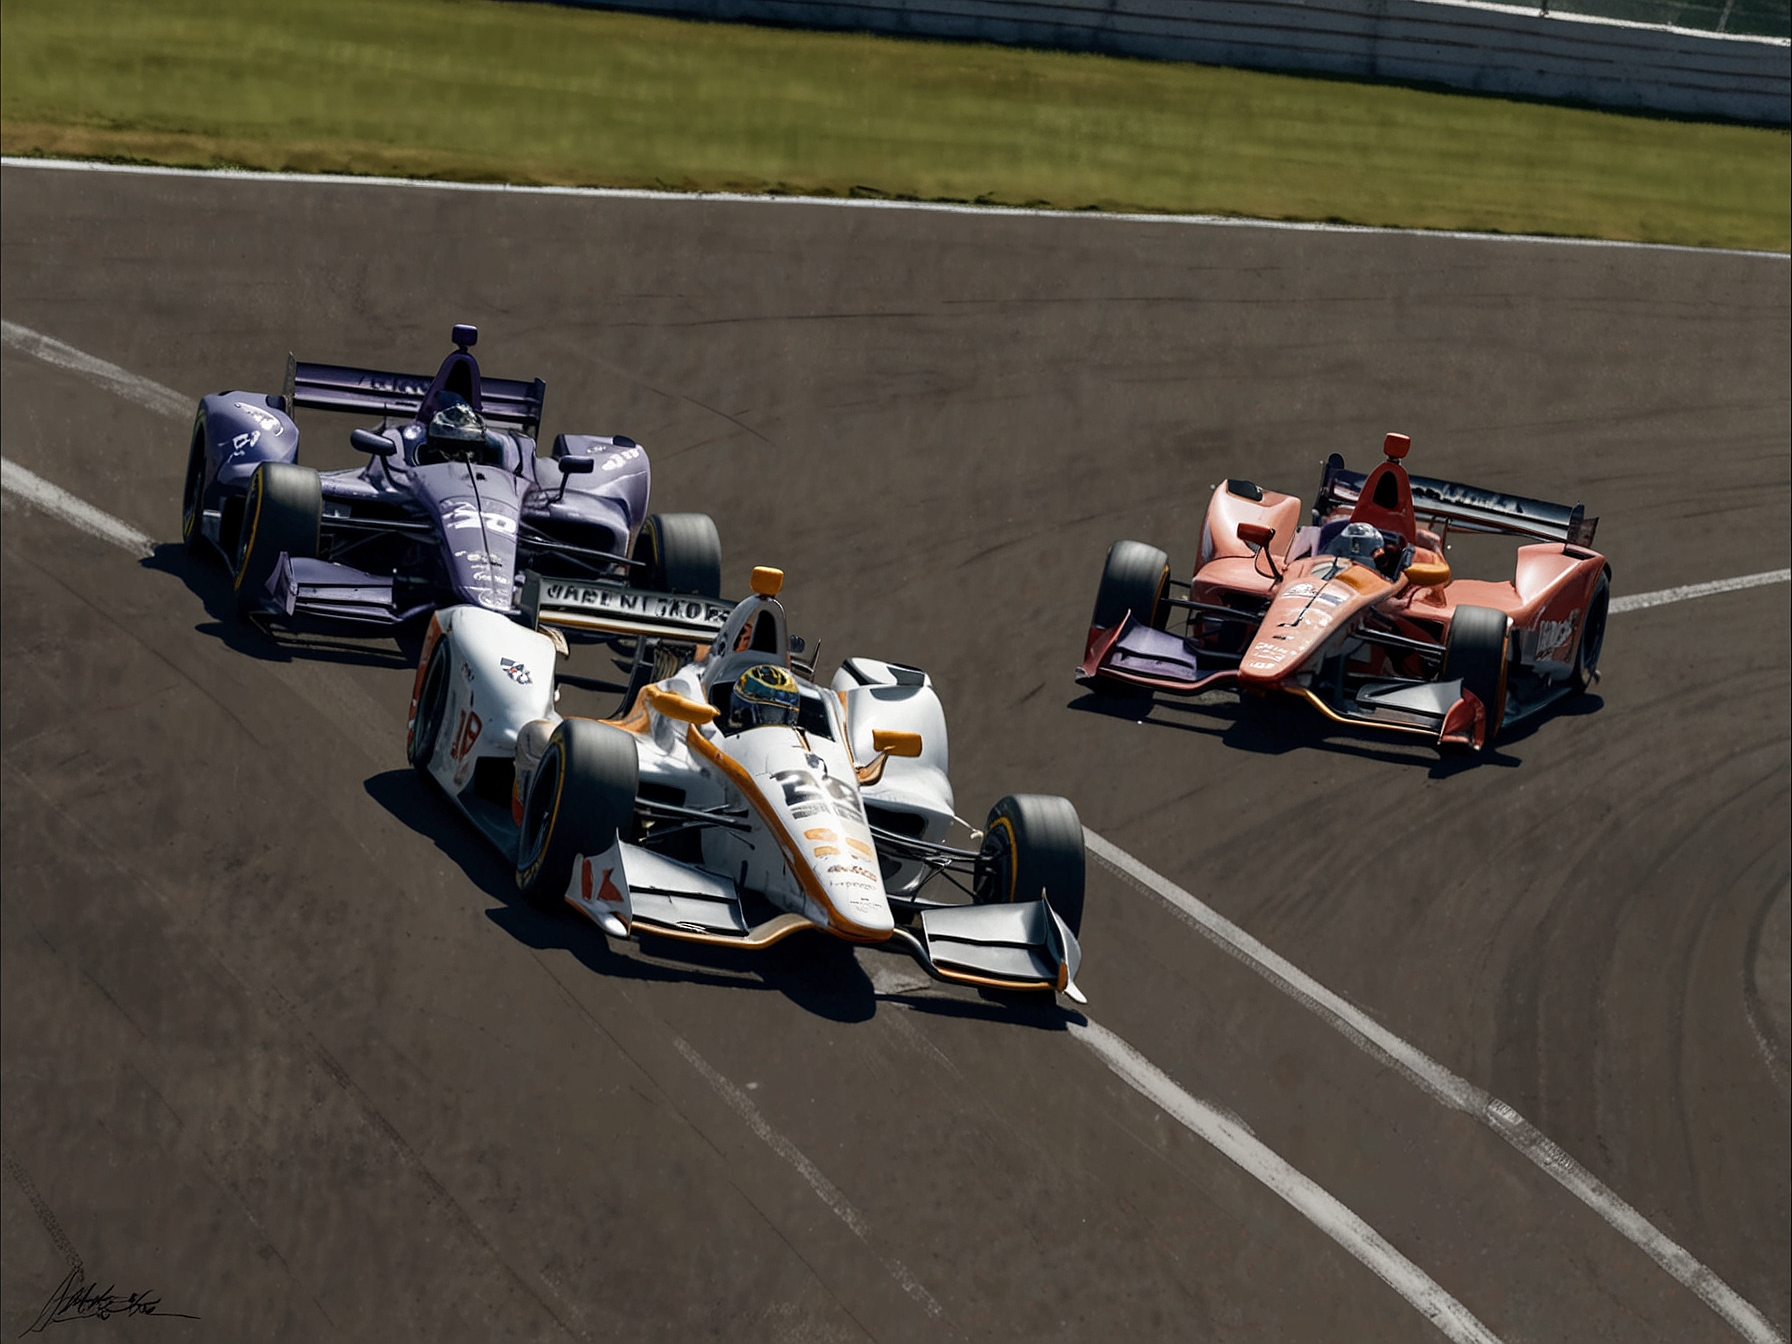 A high-energy shot of Meyer Shank Racing and Andretti Global cars racing side-by-side on an IndyCar track, emphasizing their shared commitment and collaborative effort during the race.